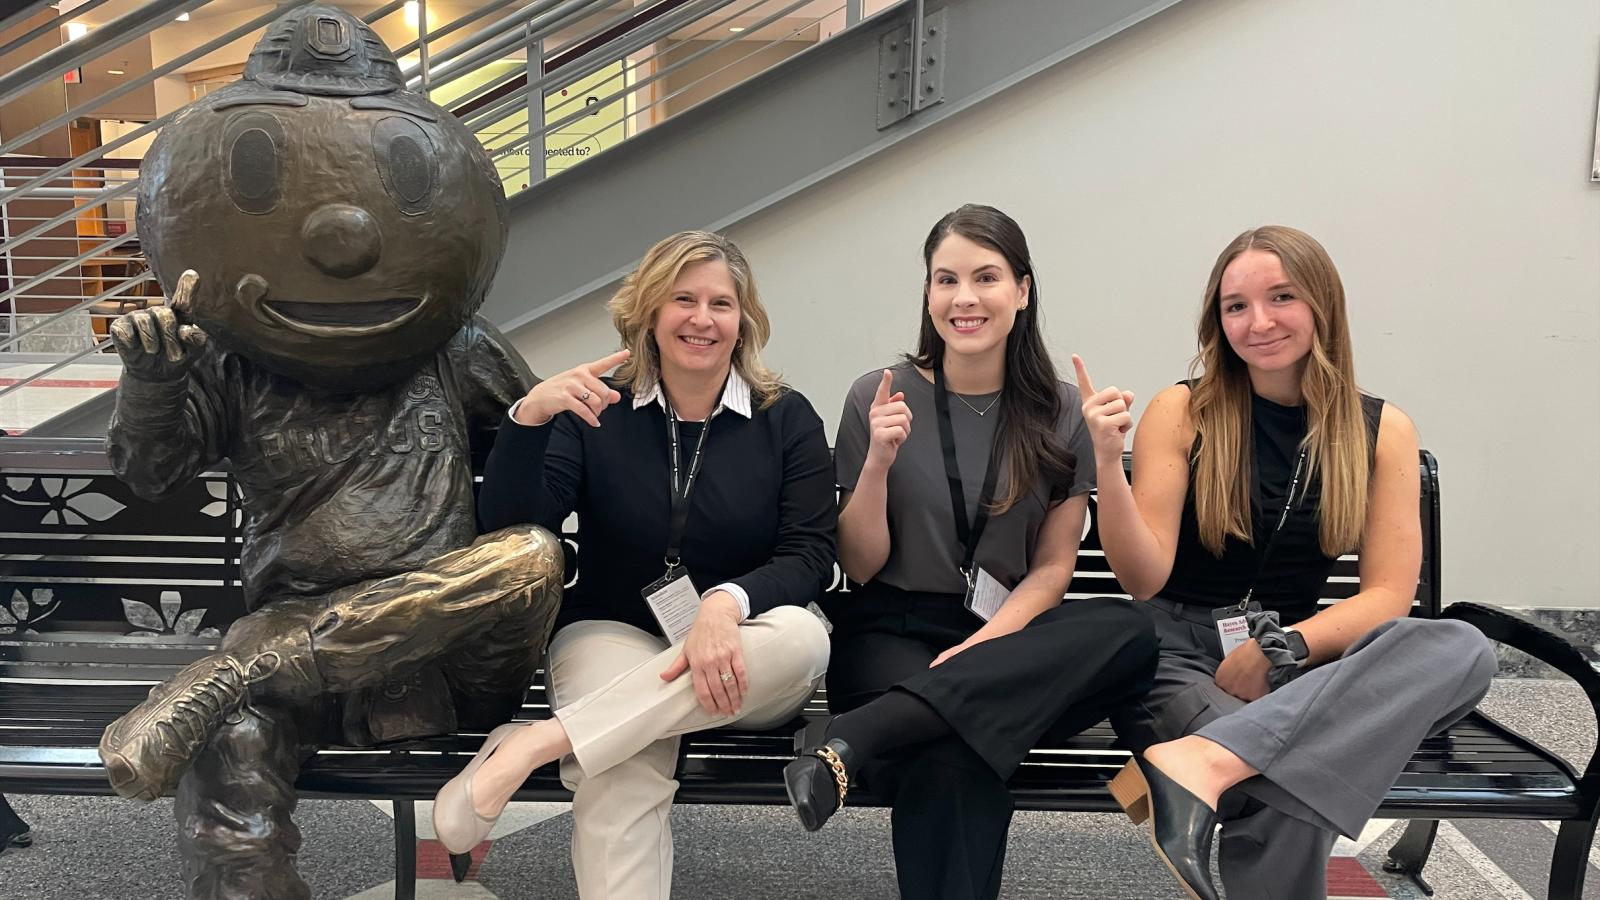 Erika Hagen, Nicole Viola and Courtney Jewell posing beside Brutus sculpture on bench